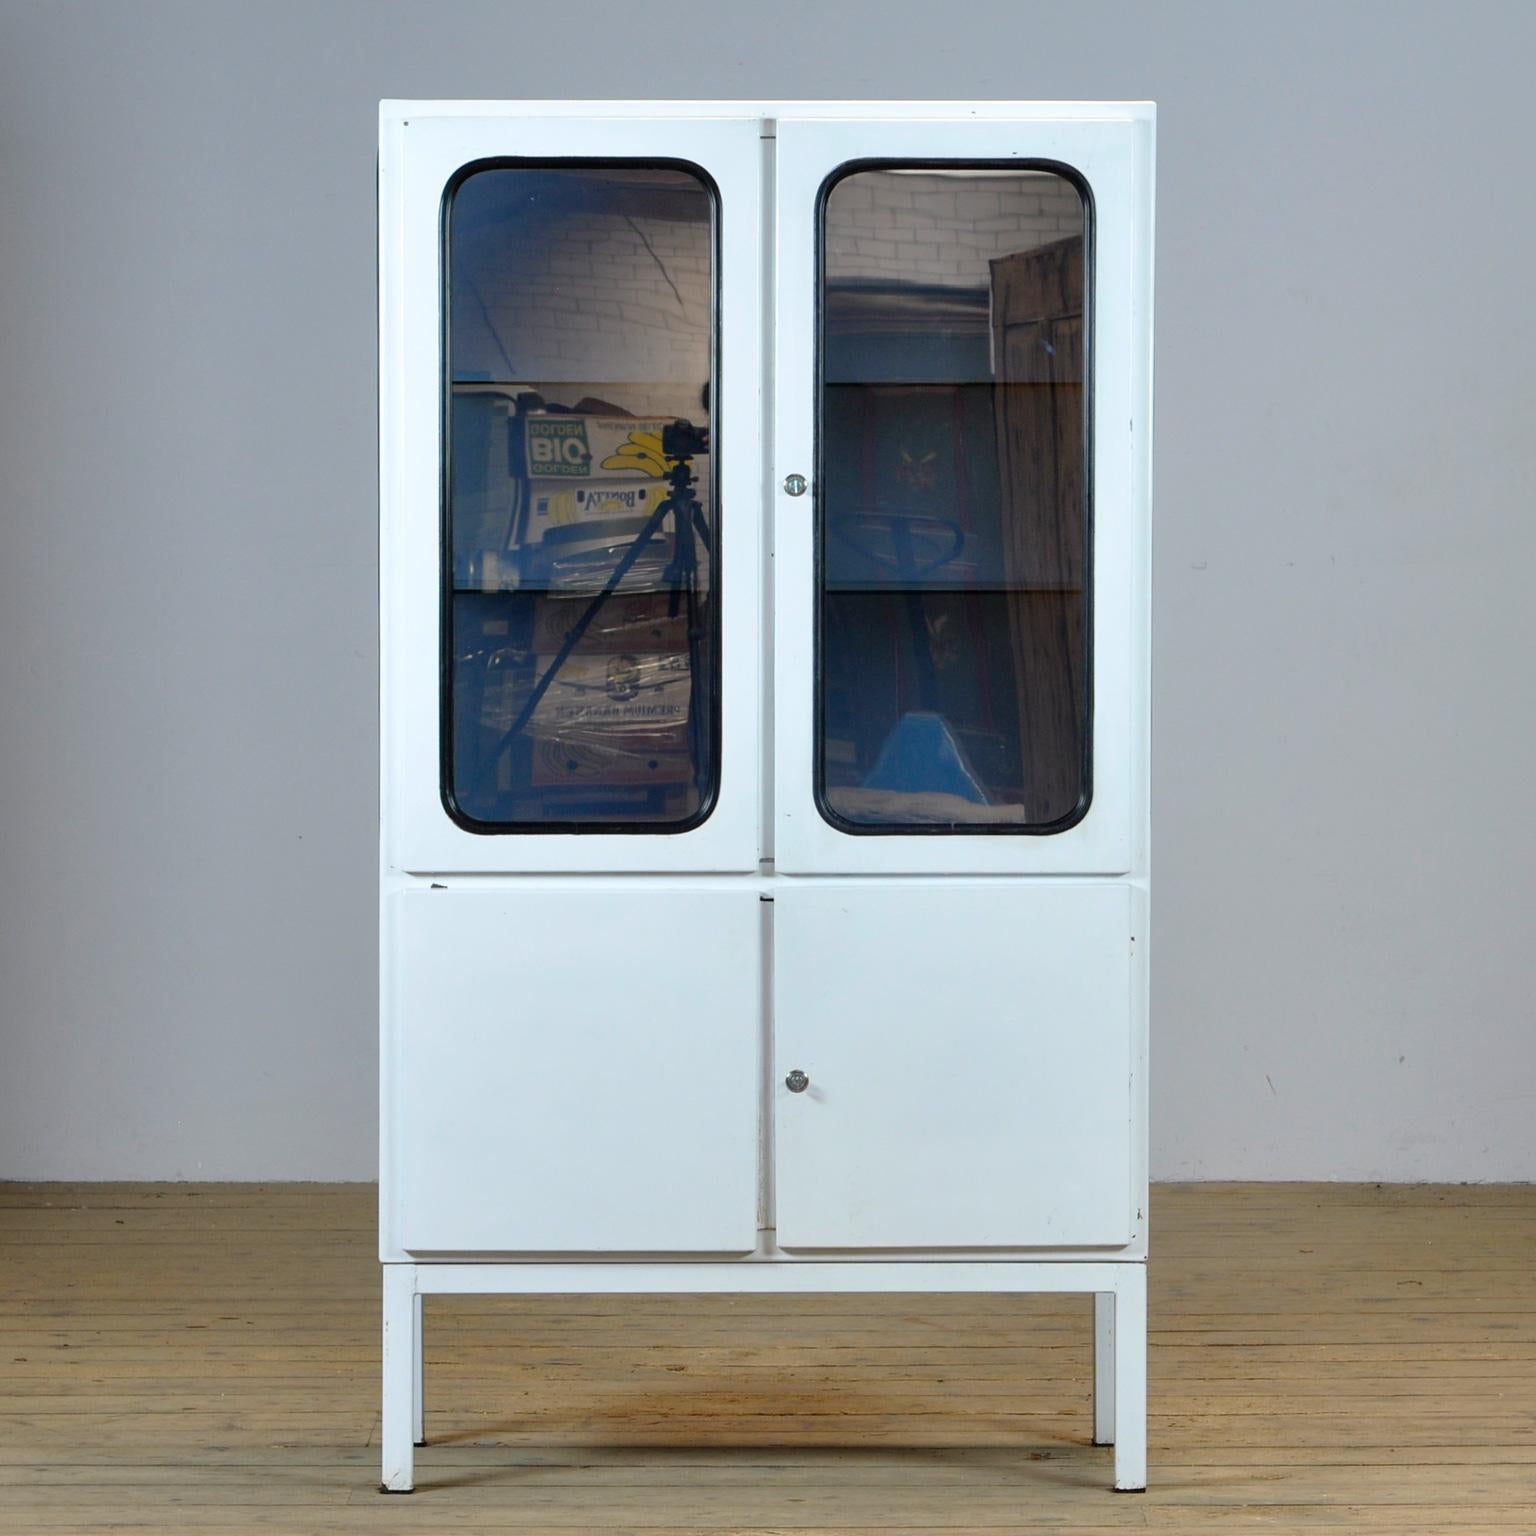 This medical cabinet was designed in the 1970s and was produced circa 1975 in hungary. It is made from iron and glass with new two glass shelves. The glass is semi-transparent/reflective. The glass is held by a black rubber strip. The cabinet